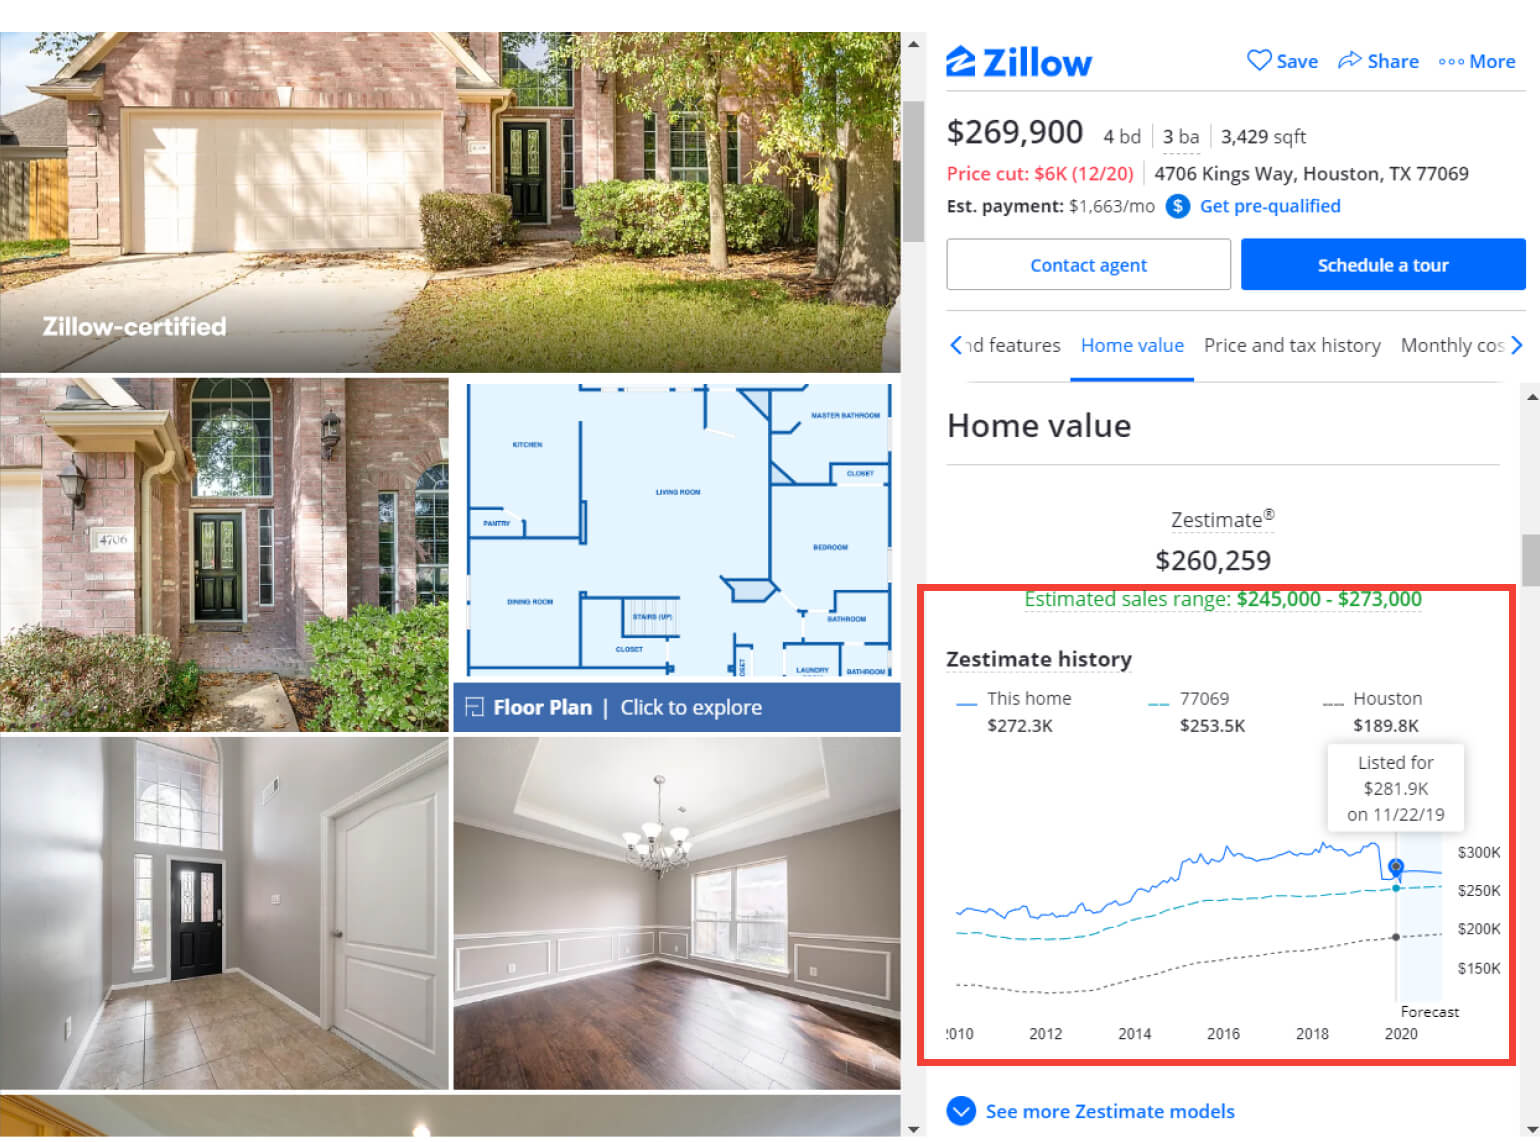 Proptech Giant Zillow Hits A Home Run With Their Excellent Performance -Body Image 3